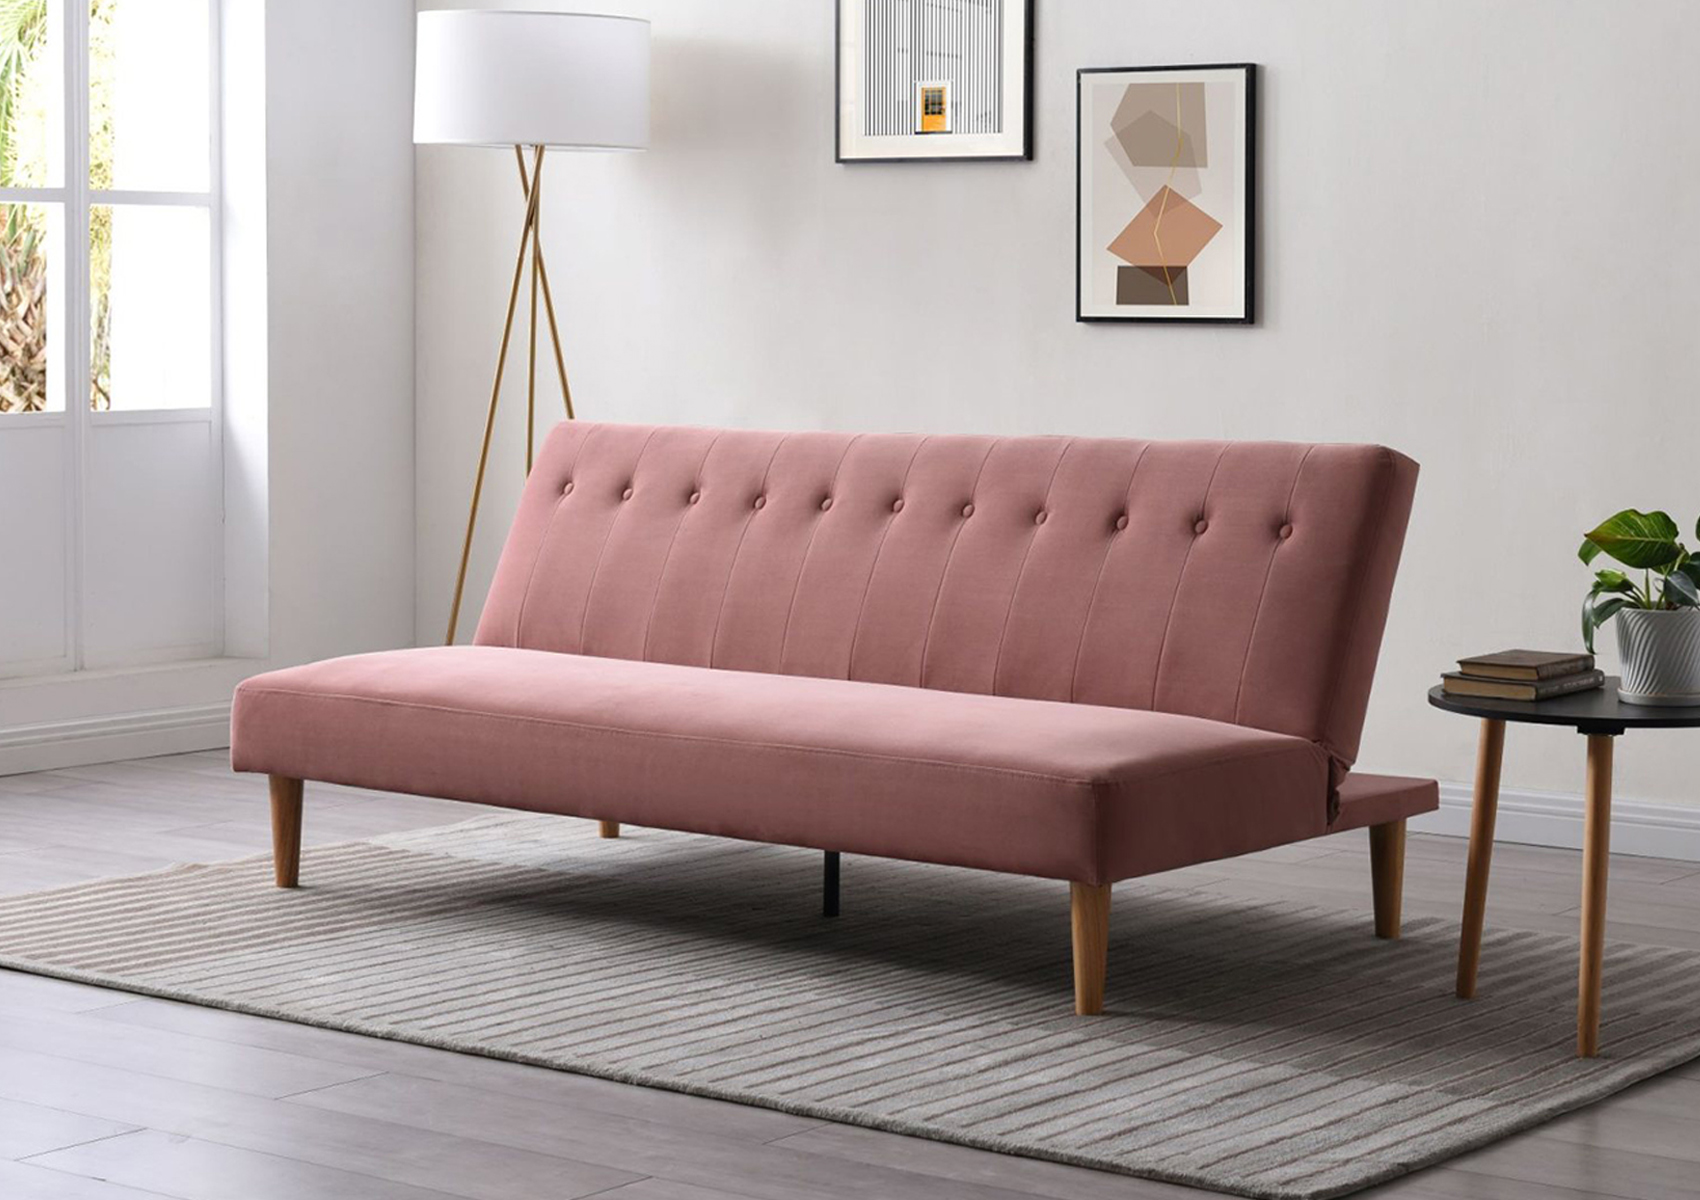 View Cotswold Dusky Pink Sofa Bed Time4Sleep information